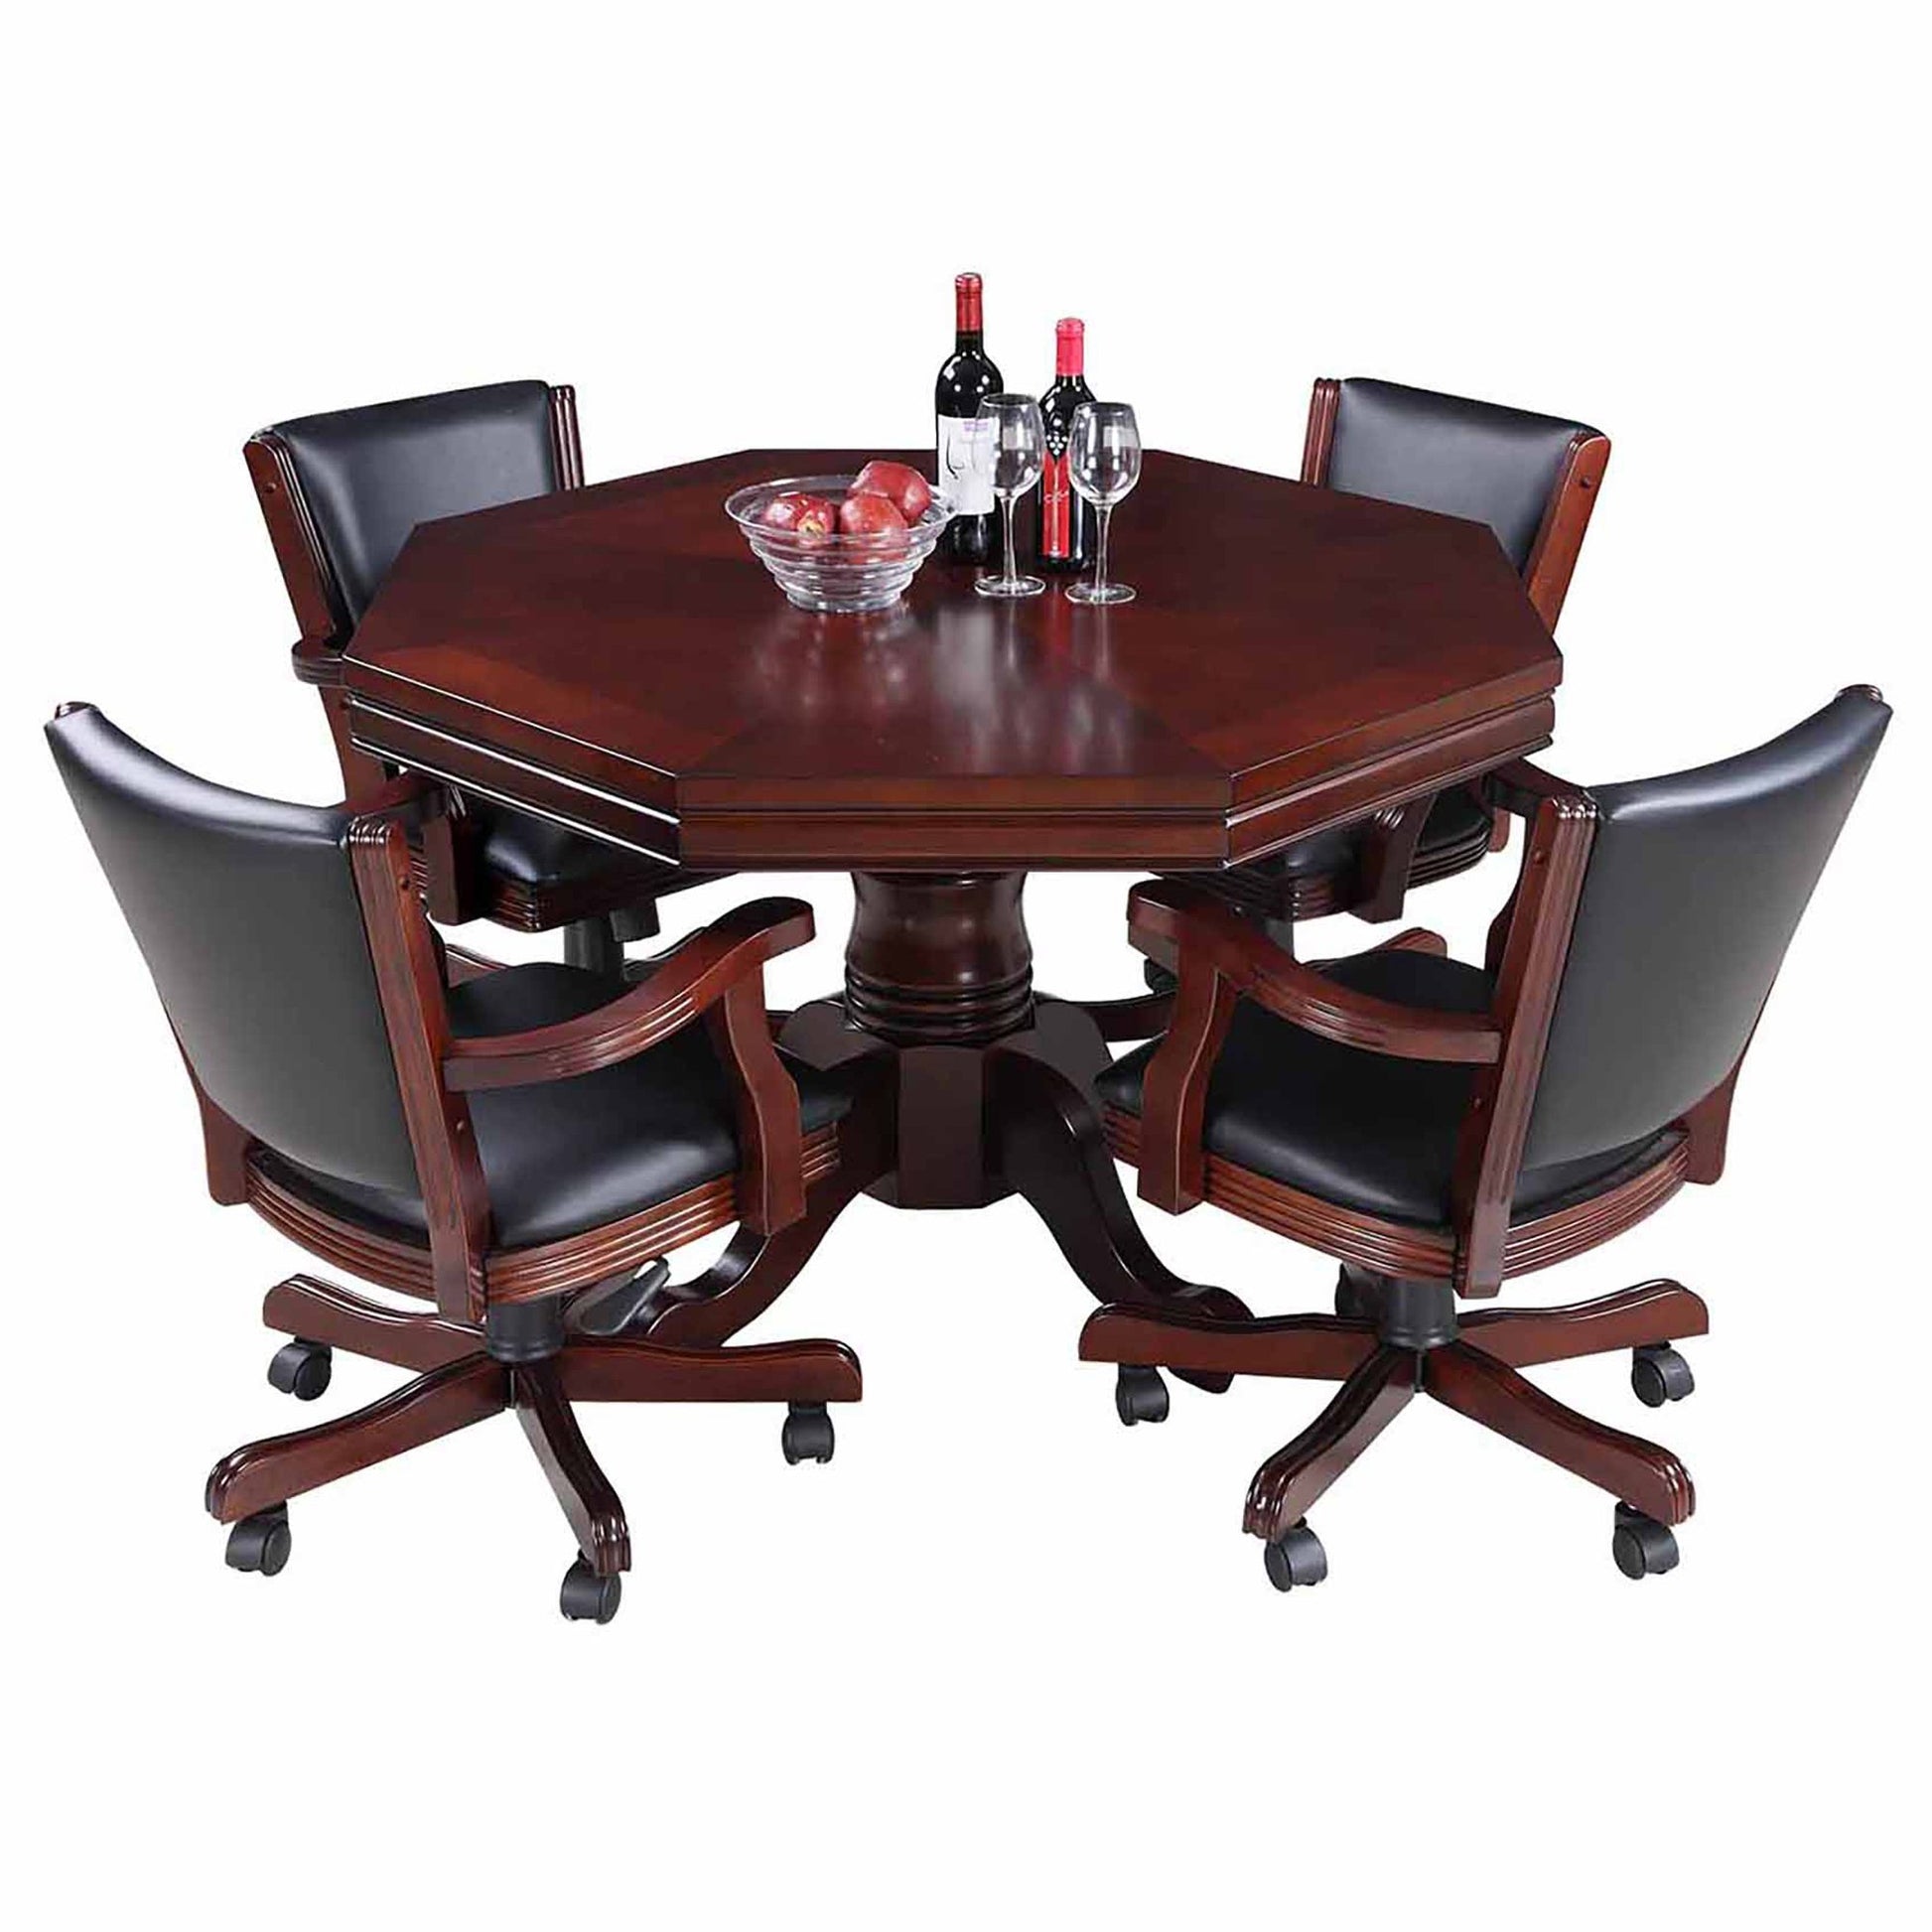 Hathaway Kingston Walnut 3 in 1 Poker Table with 4 Arm Chairs - Just Poker Tables